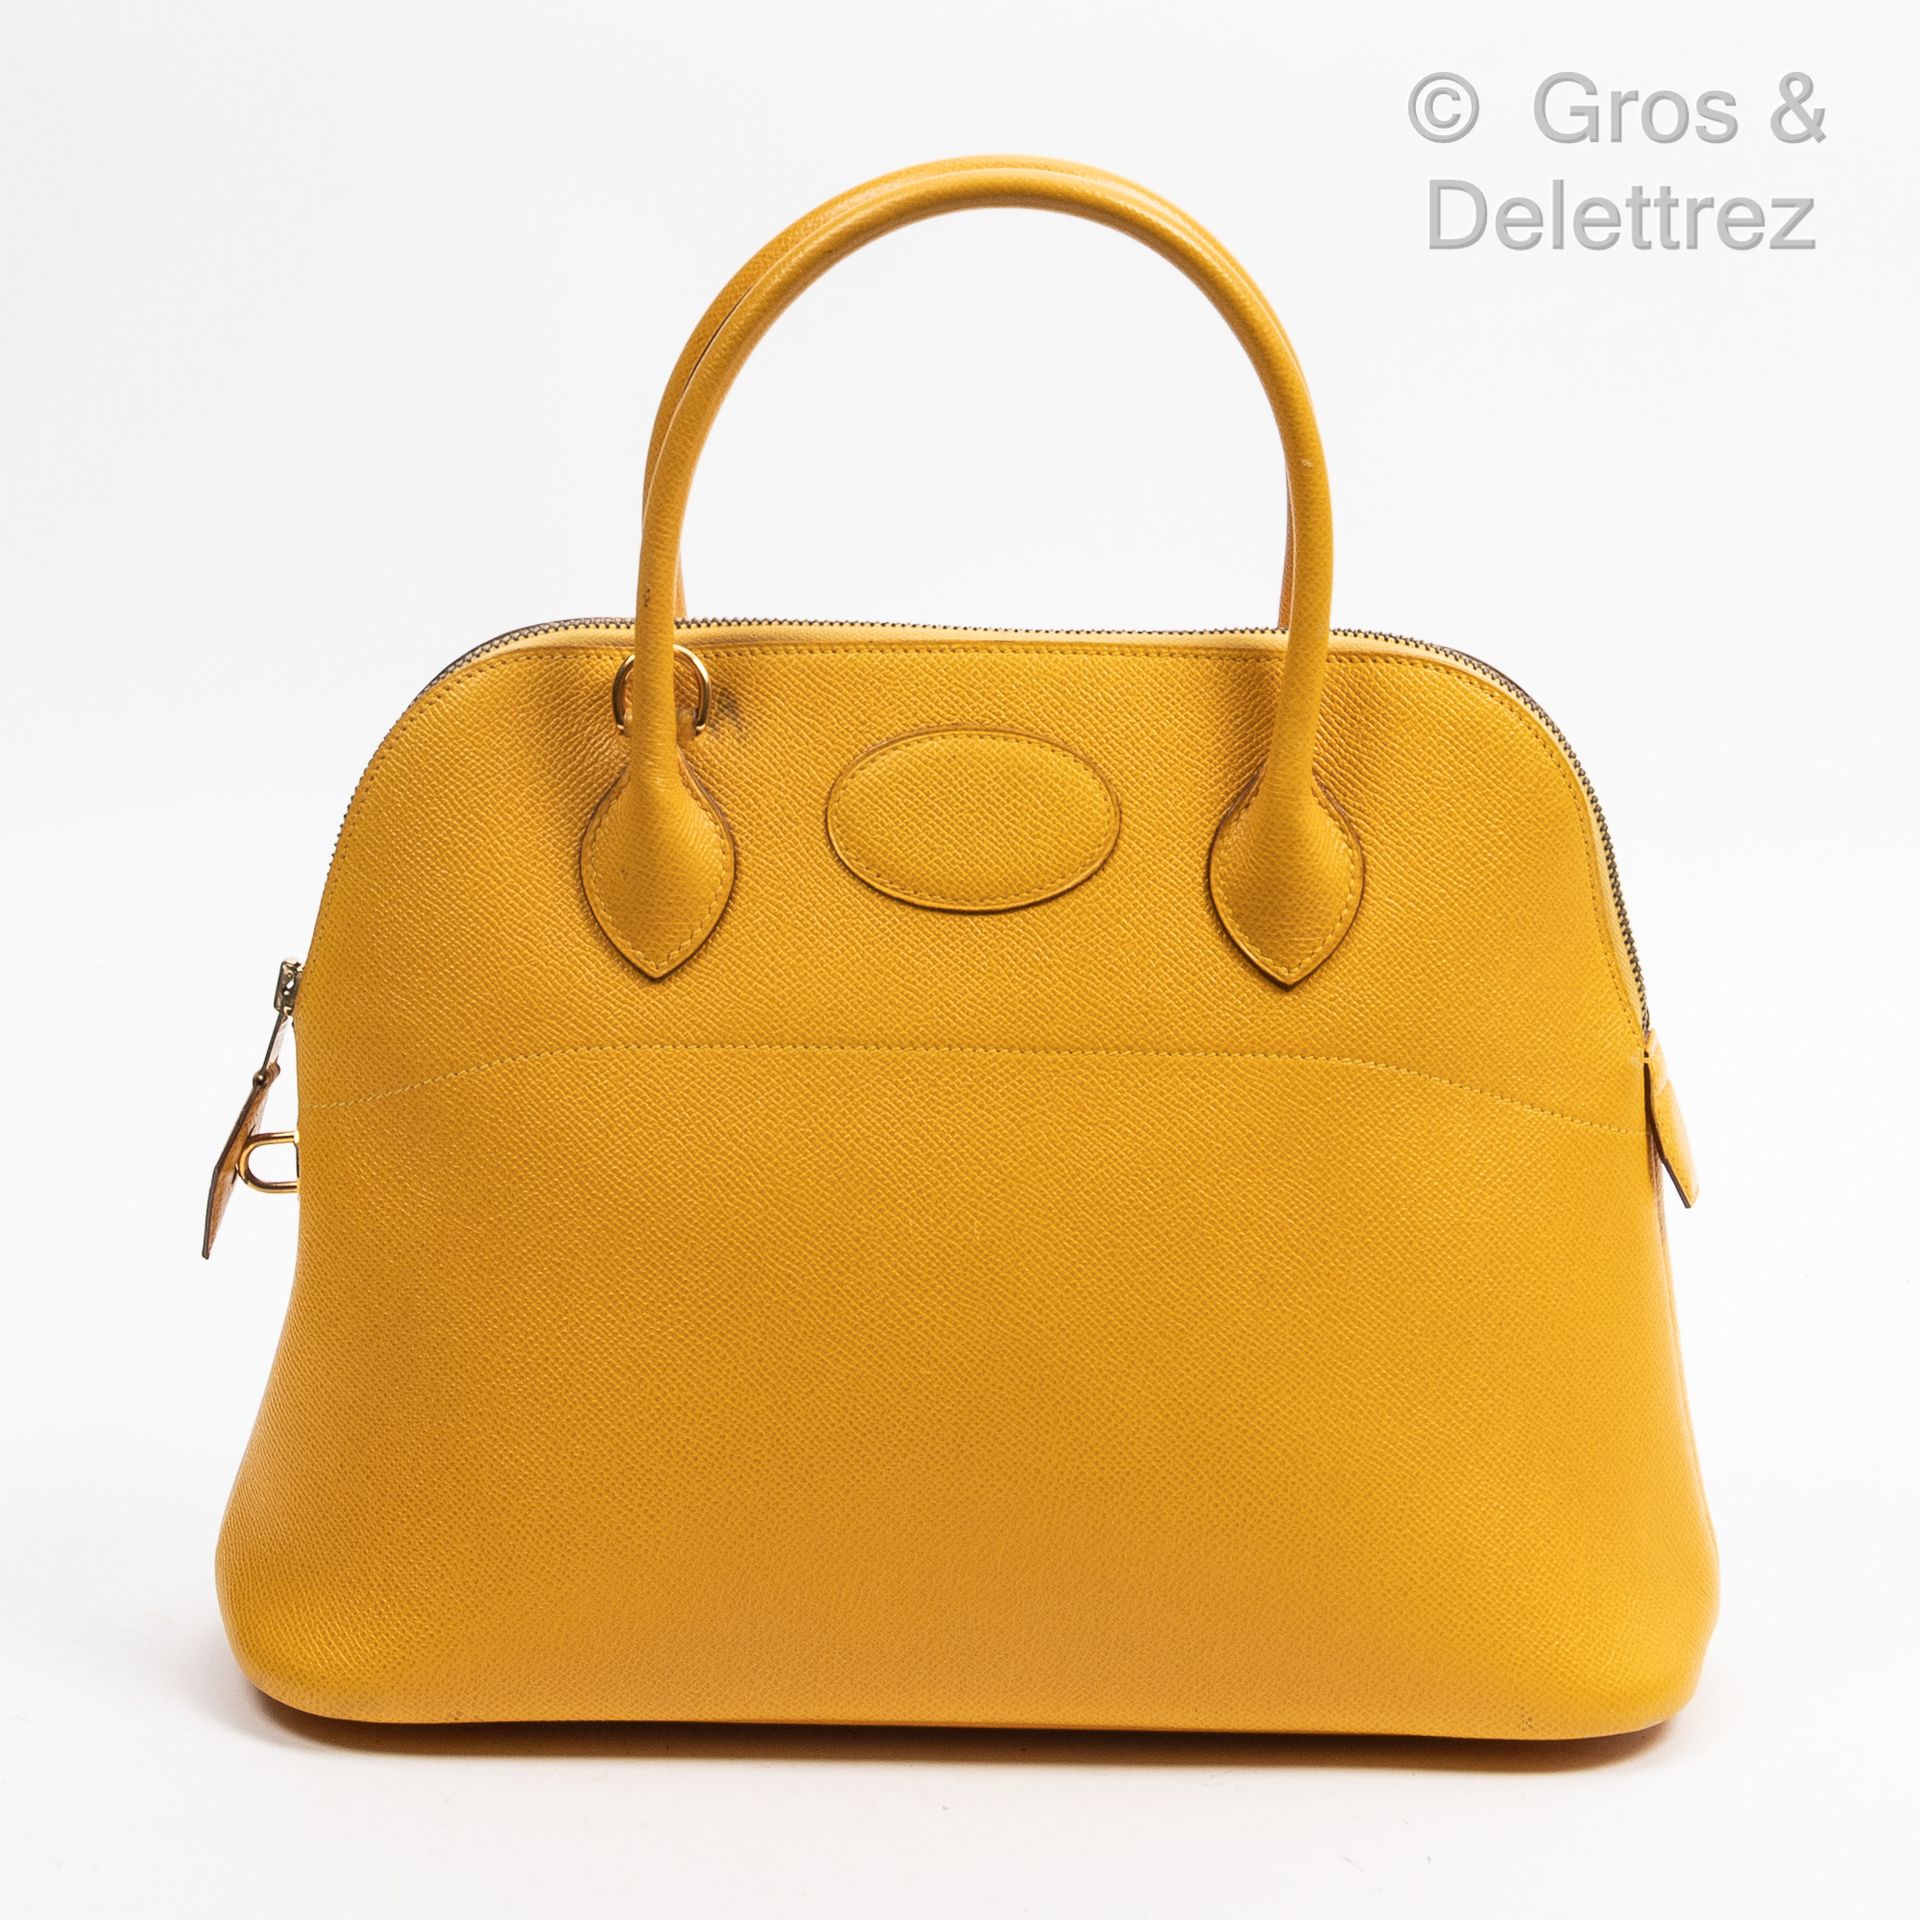 HERMÈS Paris made in France Year 1994

Bolide" bag 31 cm in chick yellow Epsom c&hellip;